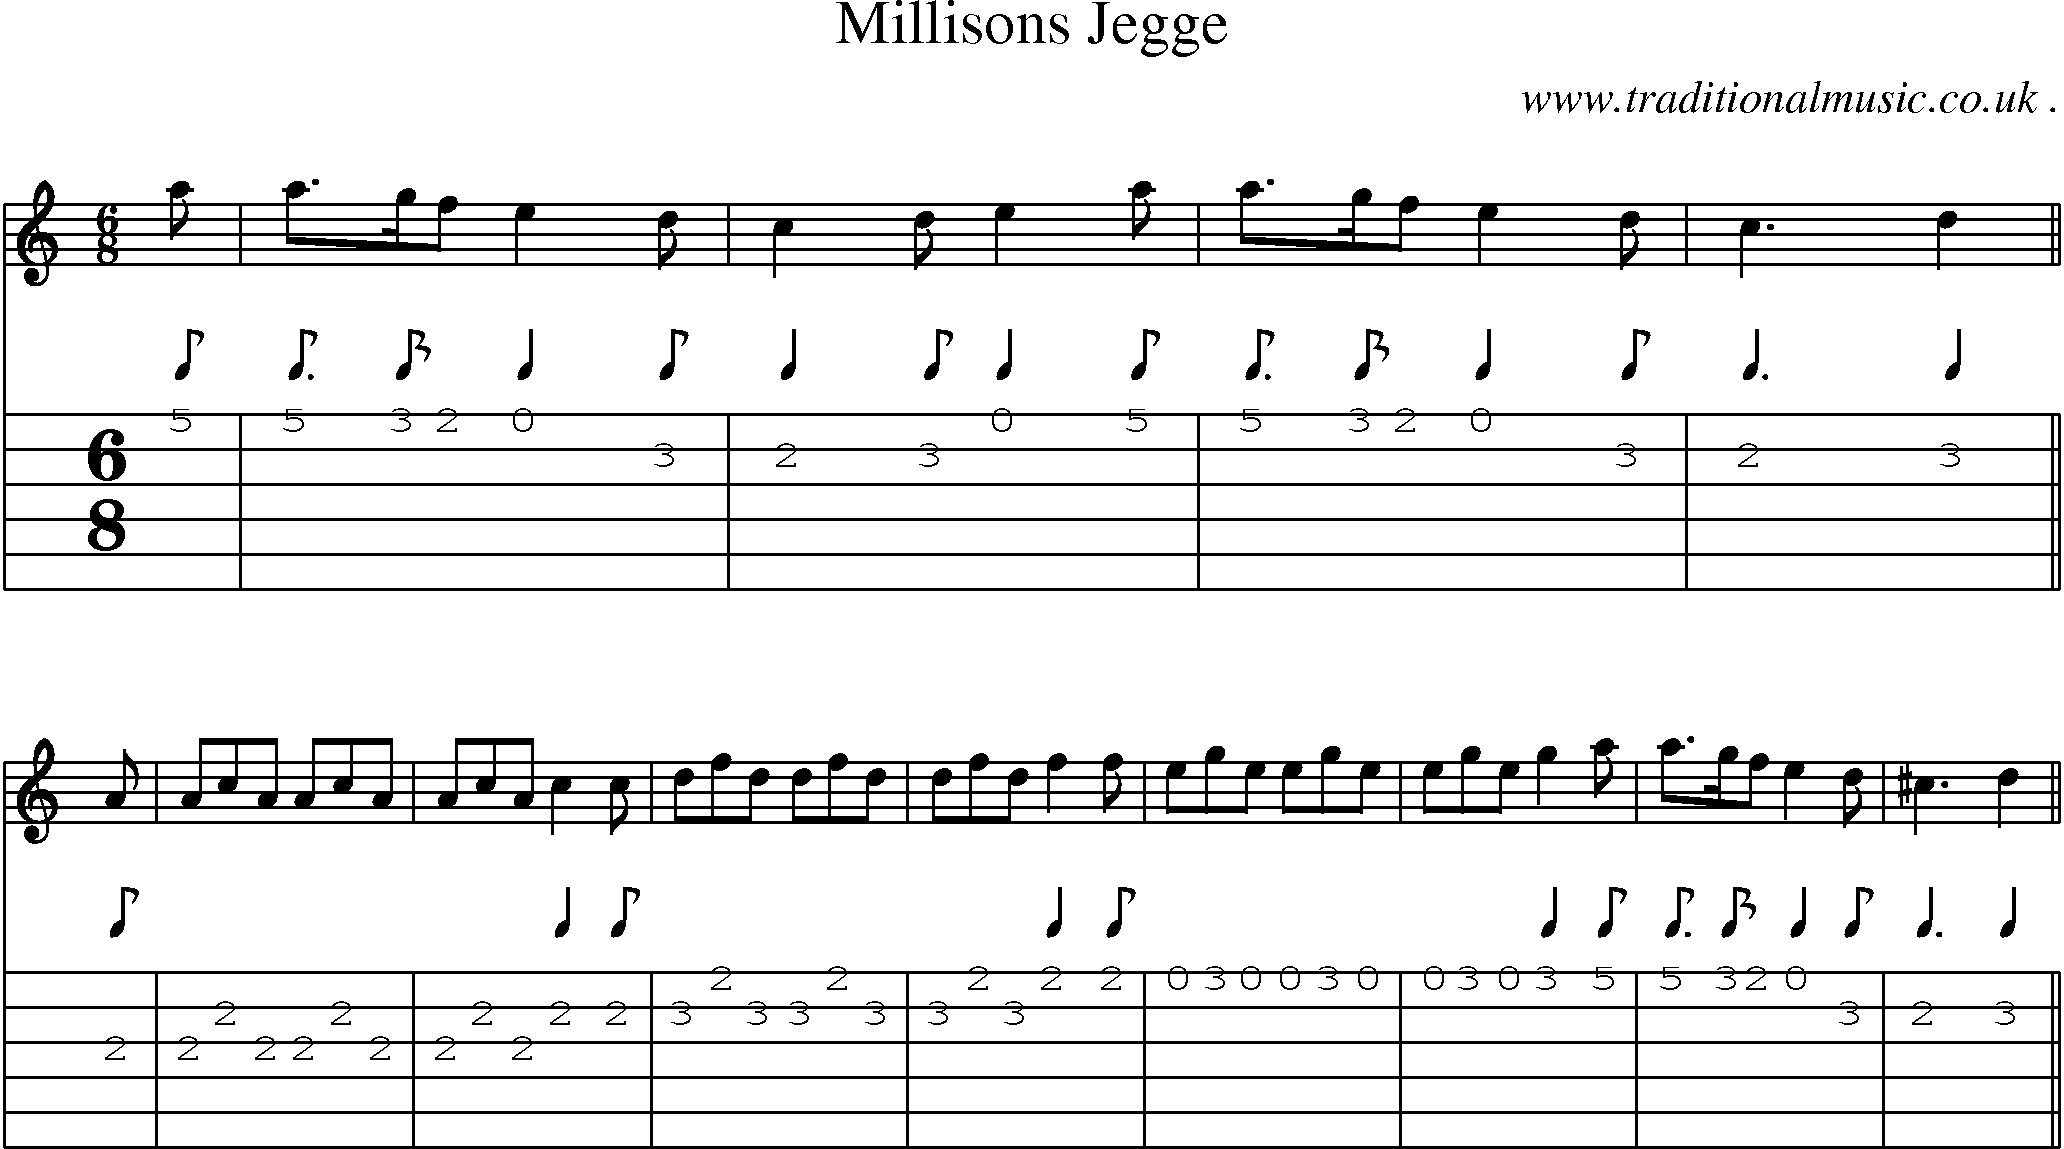 Sheet-Music and Guitar Tabs for Millisons Jegge